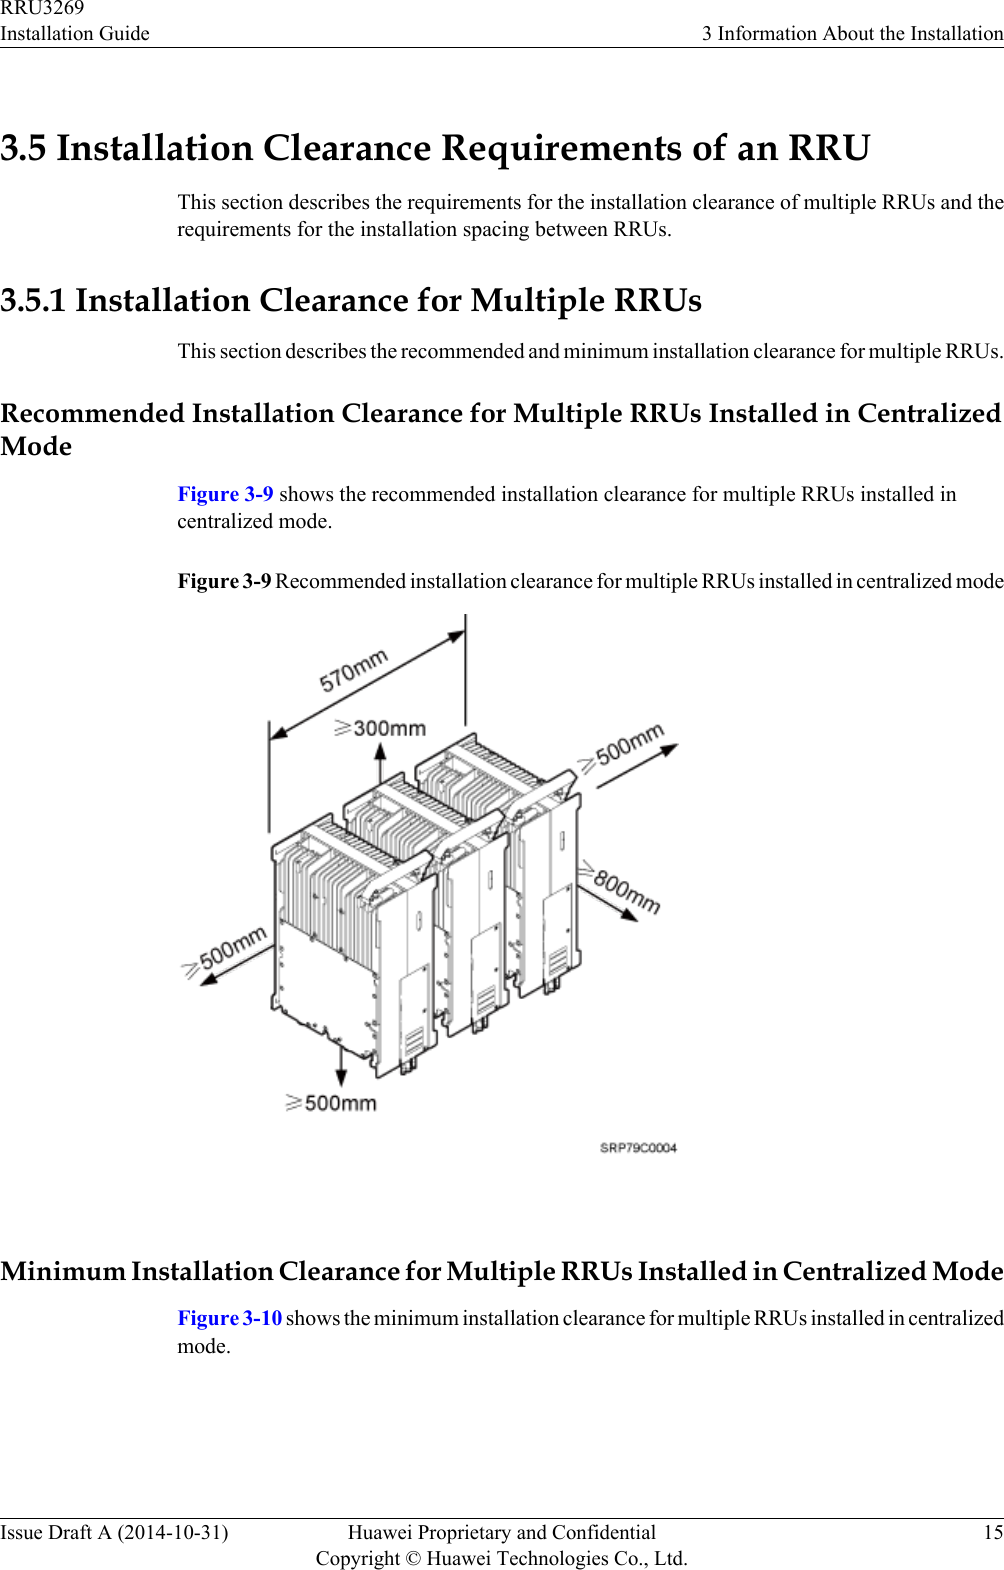 3.5 Installation Clearance Requirements of an RRUThis section describes the requirements for the installation clearance of multiple RRUs and therequirements for the installation spacing between RRUs.3.5.1 Installation Clearance for Multiple RRUsThis section describes the recommended and minimum installation clearance for multiple RRUs.Recommended Installation Clearance for Multiple RRUs Installed in CentralizedModeFigure 3-9 shows the recommended installation clearance for multiple RRUs installed incentralized mode.Figure 3-9 Recommended installation clearance for multiple RRUs installed in centralized mode Minimum Installation Clearance for Multiple RRUs Installed in Centralized ModeFigure 3-10 shows the minimum installation clearance for multiple RRUs installed in centralizedmode.RRU3269Installation Guide 3 Information About the InstallationIssue Draft A (2014-10-31) Huawei Proprietary and ConfidentialCopyright © Huawei Technologies Co., Ltd.15